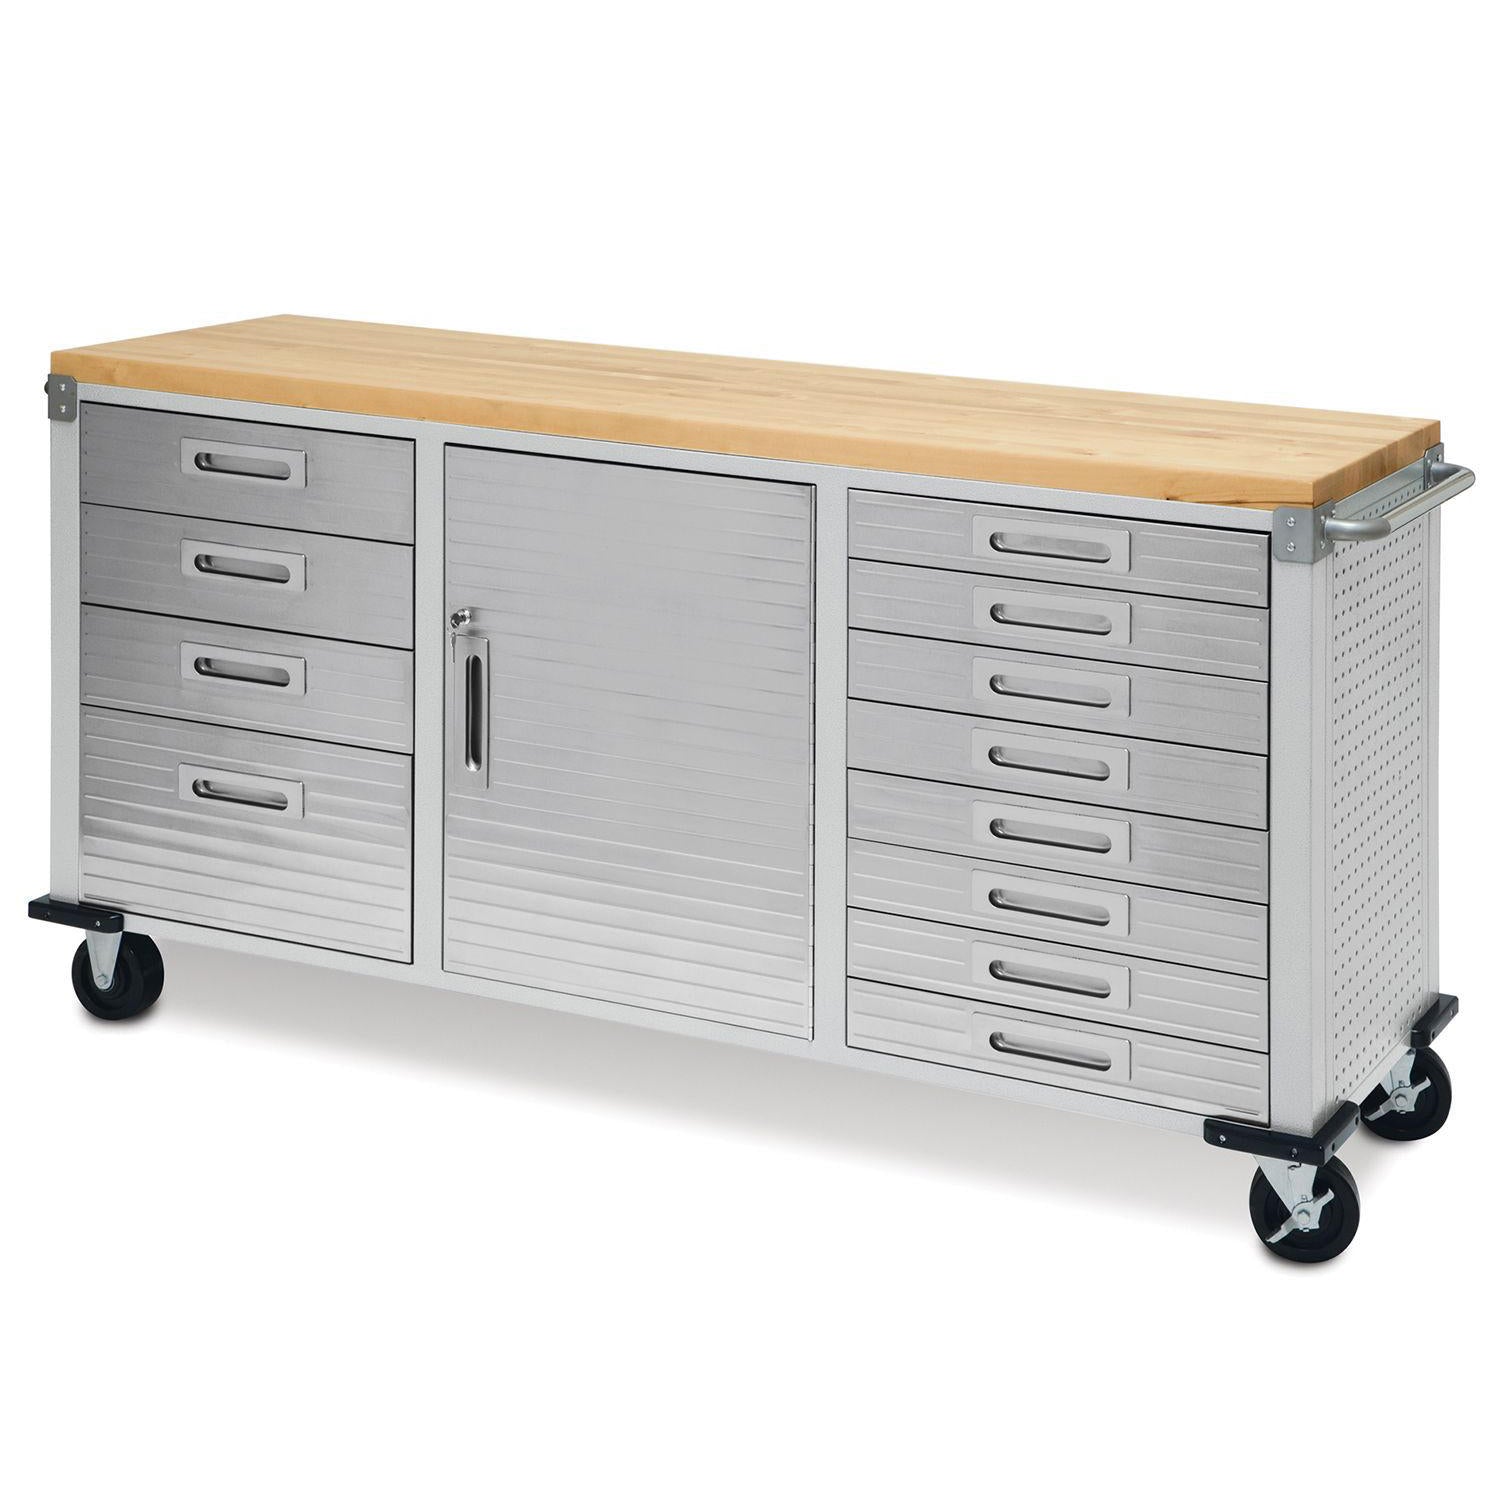 Tools of the Year 2021: Workbenches & Tool Chests